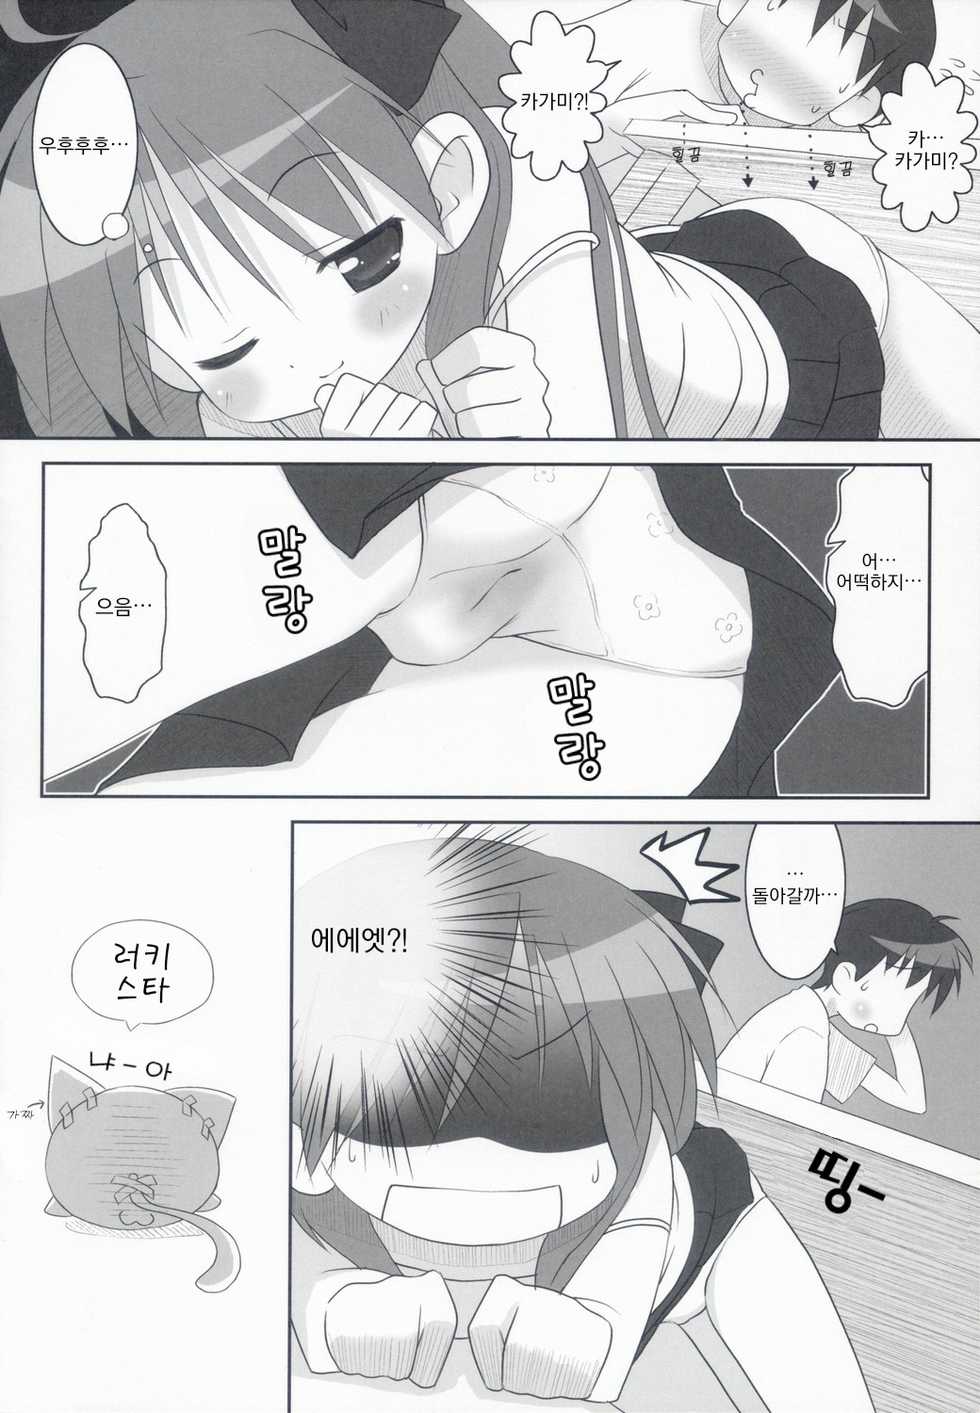 (Puniket 15) [Oden-Ya (Misooden)] KAGA MINE (Lucky Star) [Korean] [딸기실업] - Page 9